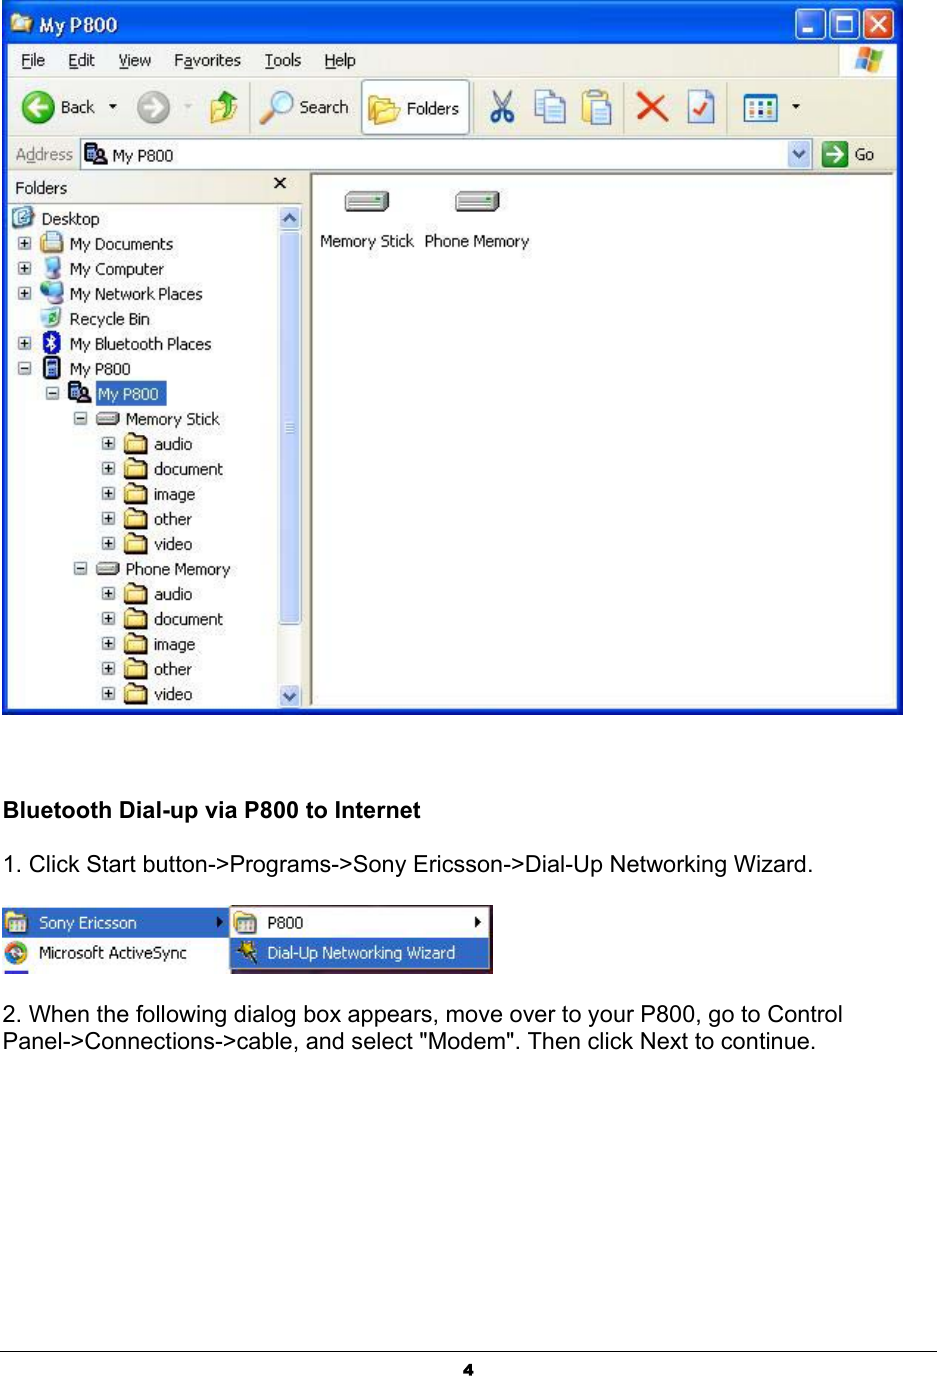  4    Bluetooth Dial-up via P800 to Internet  1. Click Start button-&gt;Programs-&gt;Sony Ericsson-&gt;Dial-Up Networking Wizard.  2. When the following dialog box appears, move over to your P800, go to Control Panel-&gt;Connections-&gt;cable, and select &quot;Modem&quot;. Then click Next to continue. 